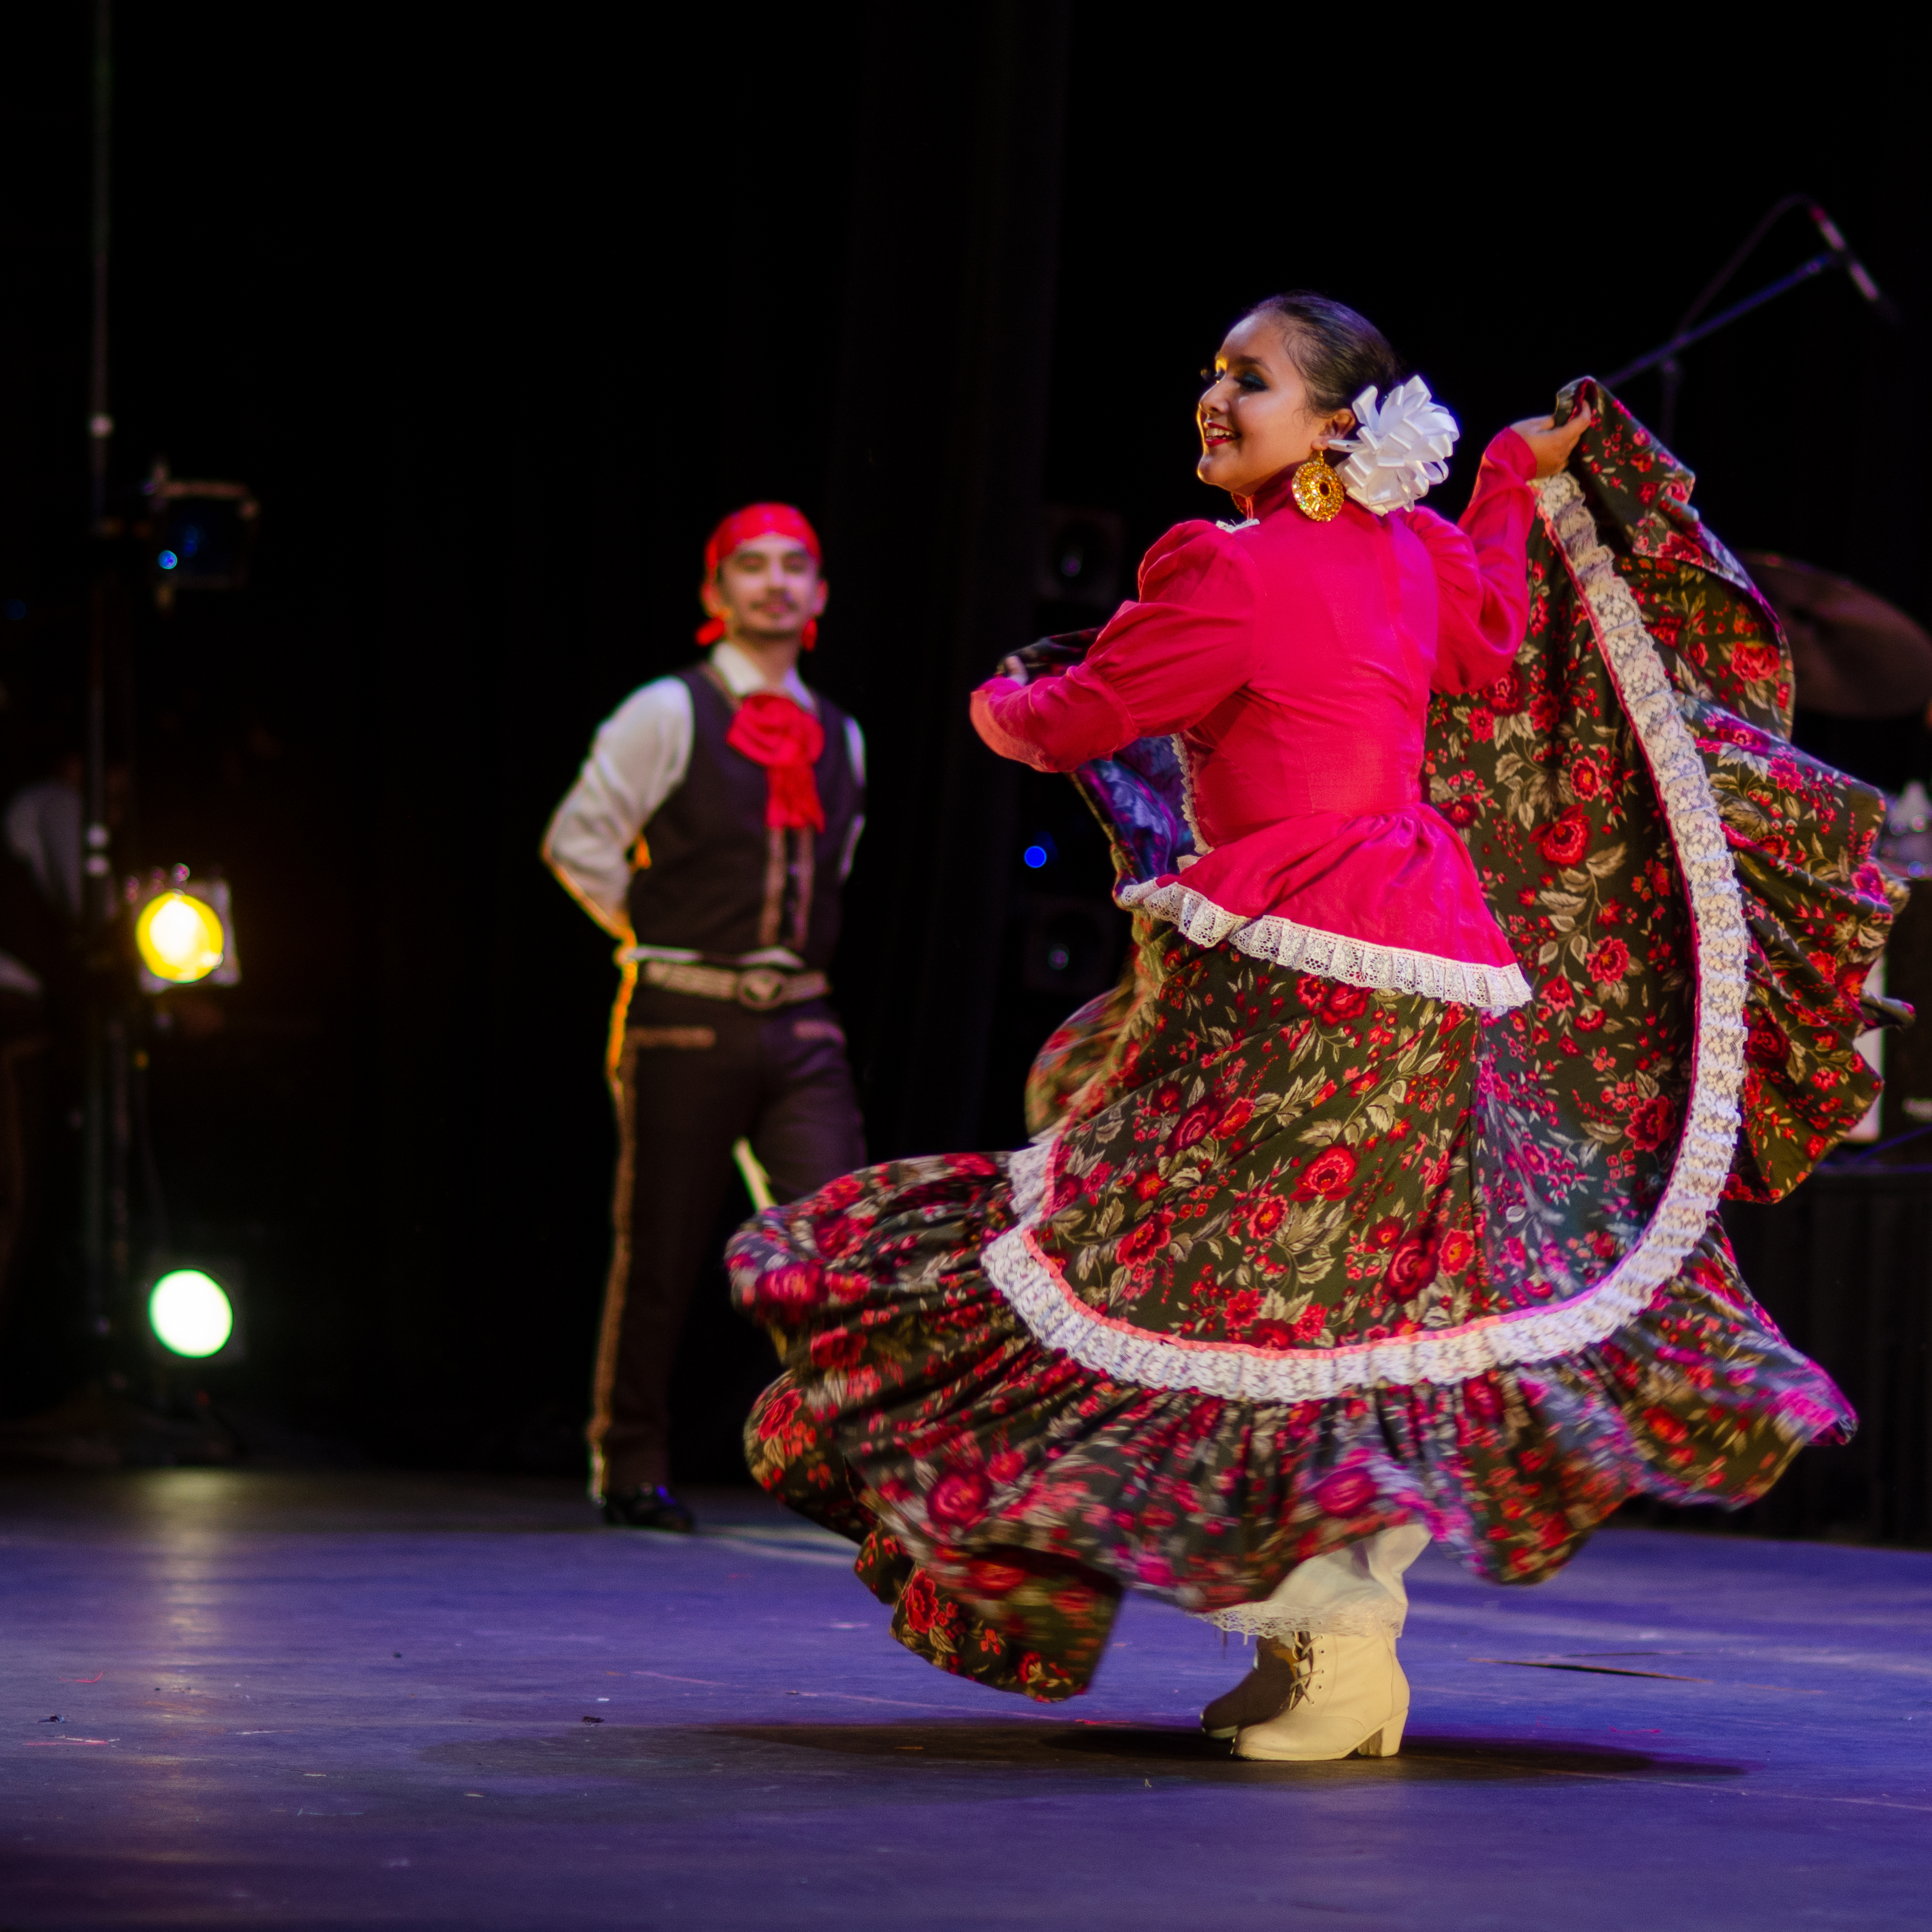 The Mexican Dance Company performing a number from Zacatecas